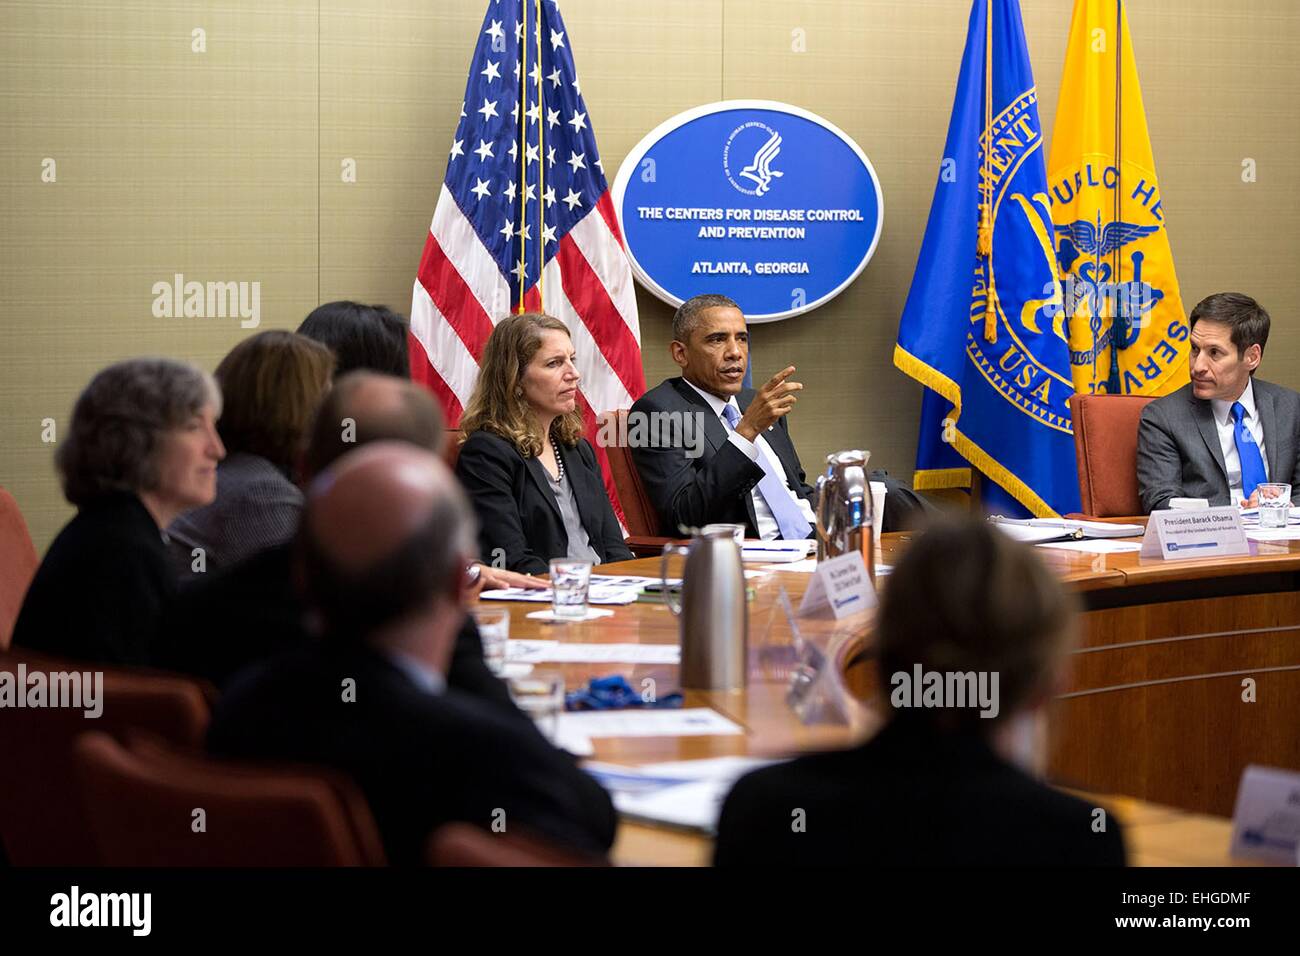 US President Barack Obama speaks during a briefing on the Ebola epidemic in West Africa at the headquarters of the Centers for Disease Control and Prevention  September 16, 2014 in Atlanta, Georgia. The President is seated between Health and Human Services Secretary Sylvia Mathews Burwell, and Dr. Tom Frieden, Director, Centers for Disease Control and Prevention. Stock Photo